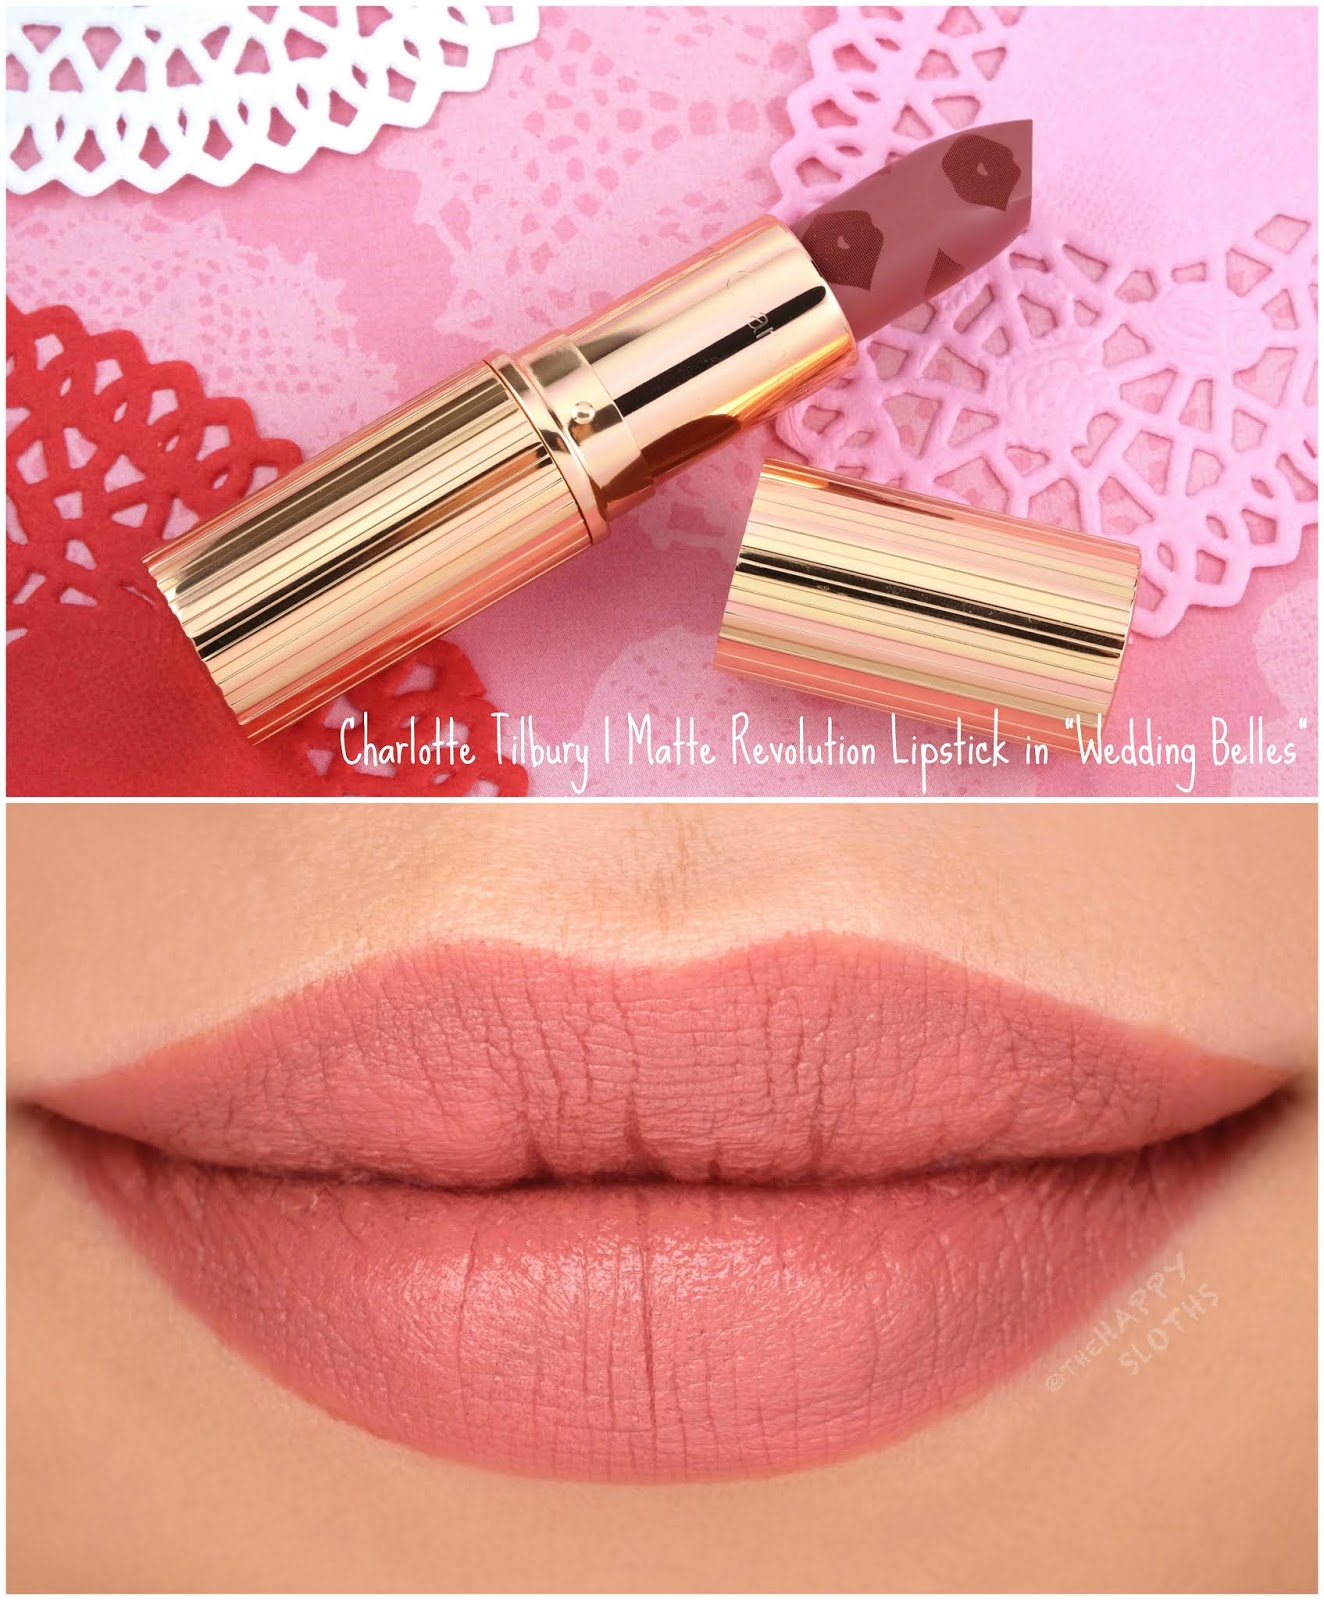 Charlotte Tilbury | *NEW* Love Filter Matte Revolution Lipstick in "Wedding Belles": Review and Swatches